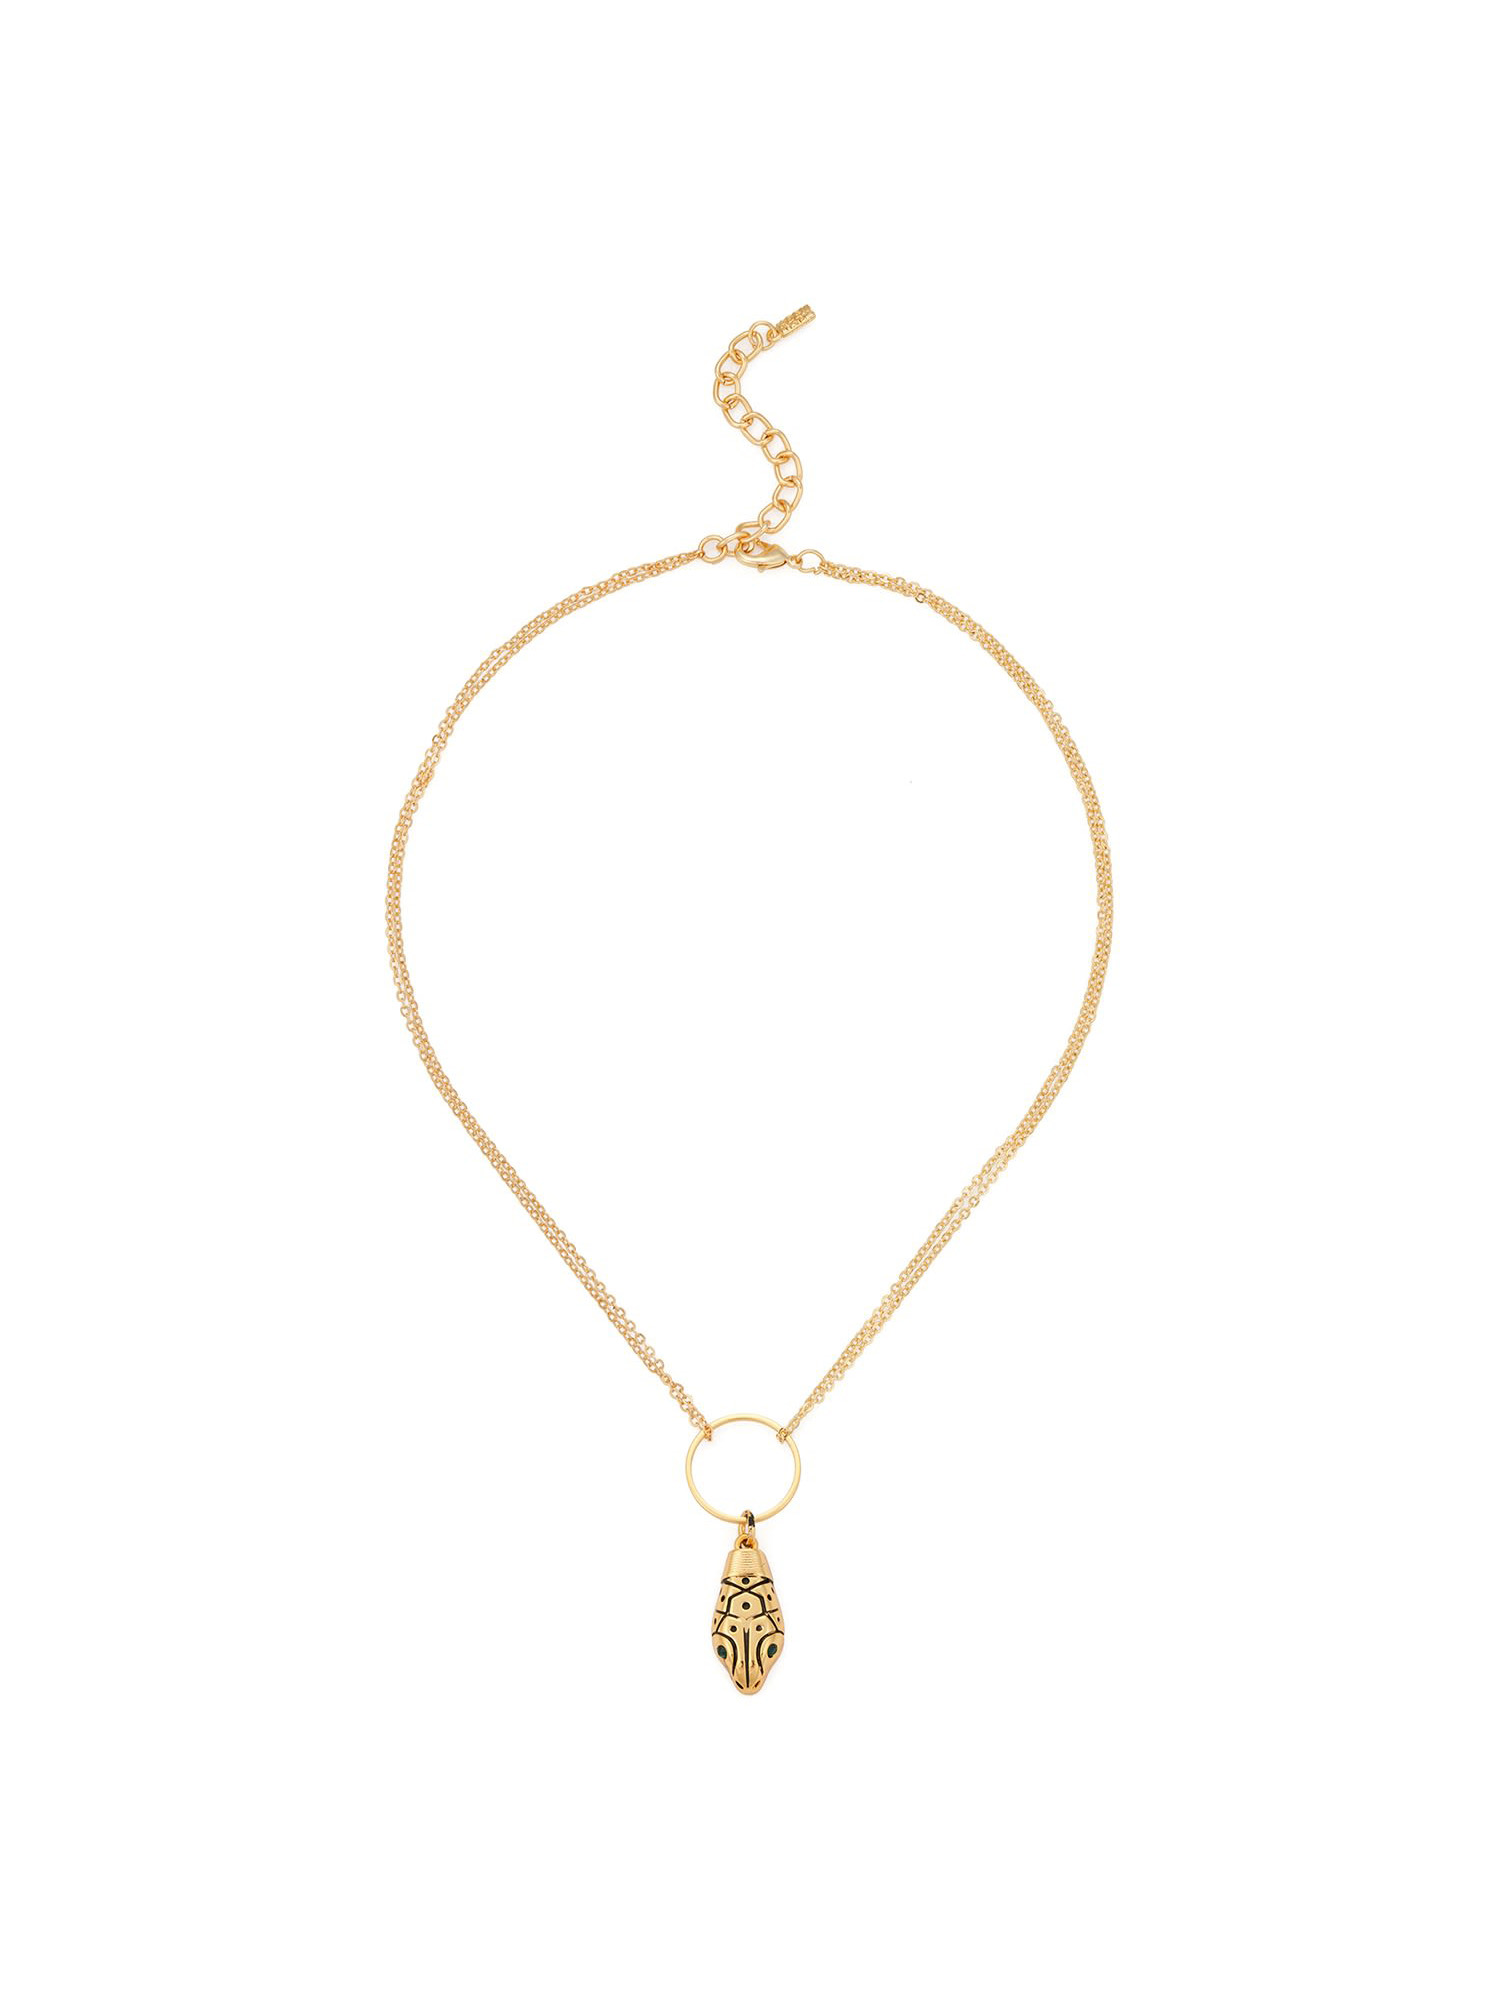 THE PYTHON NECKLACE GOLD